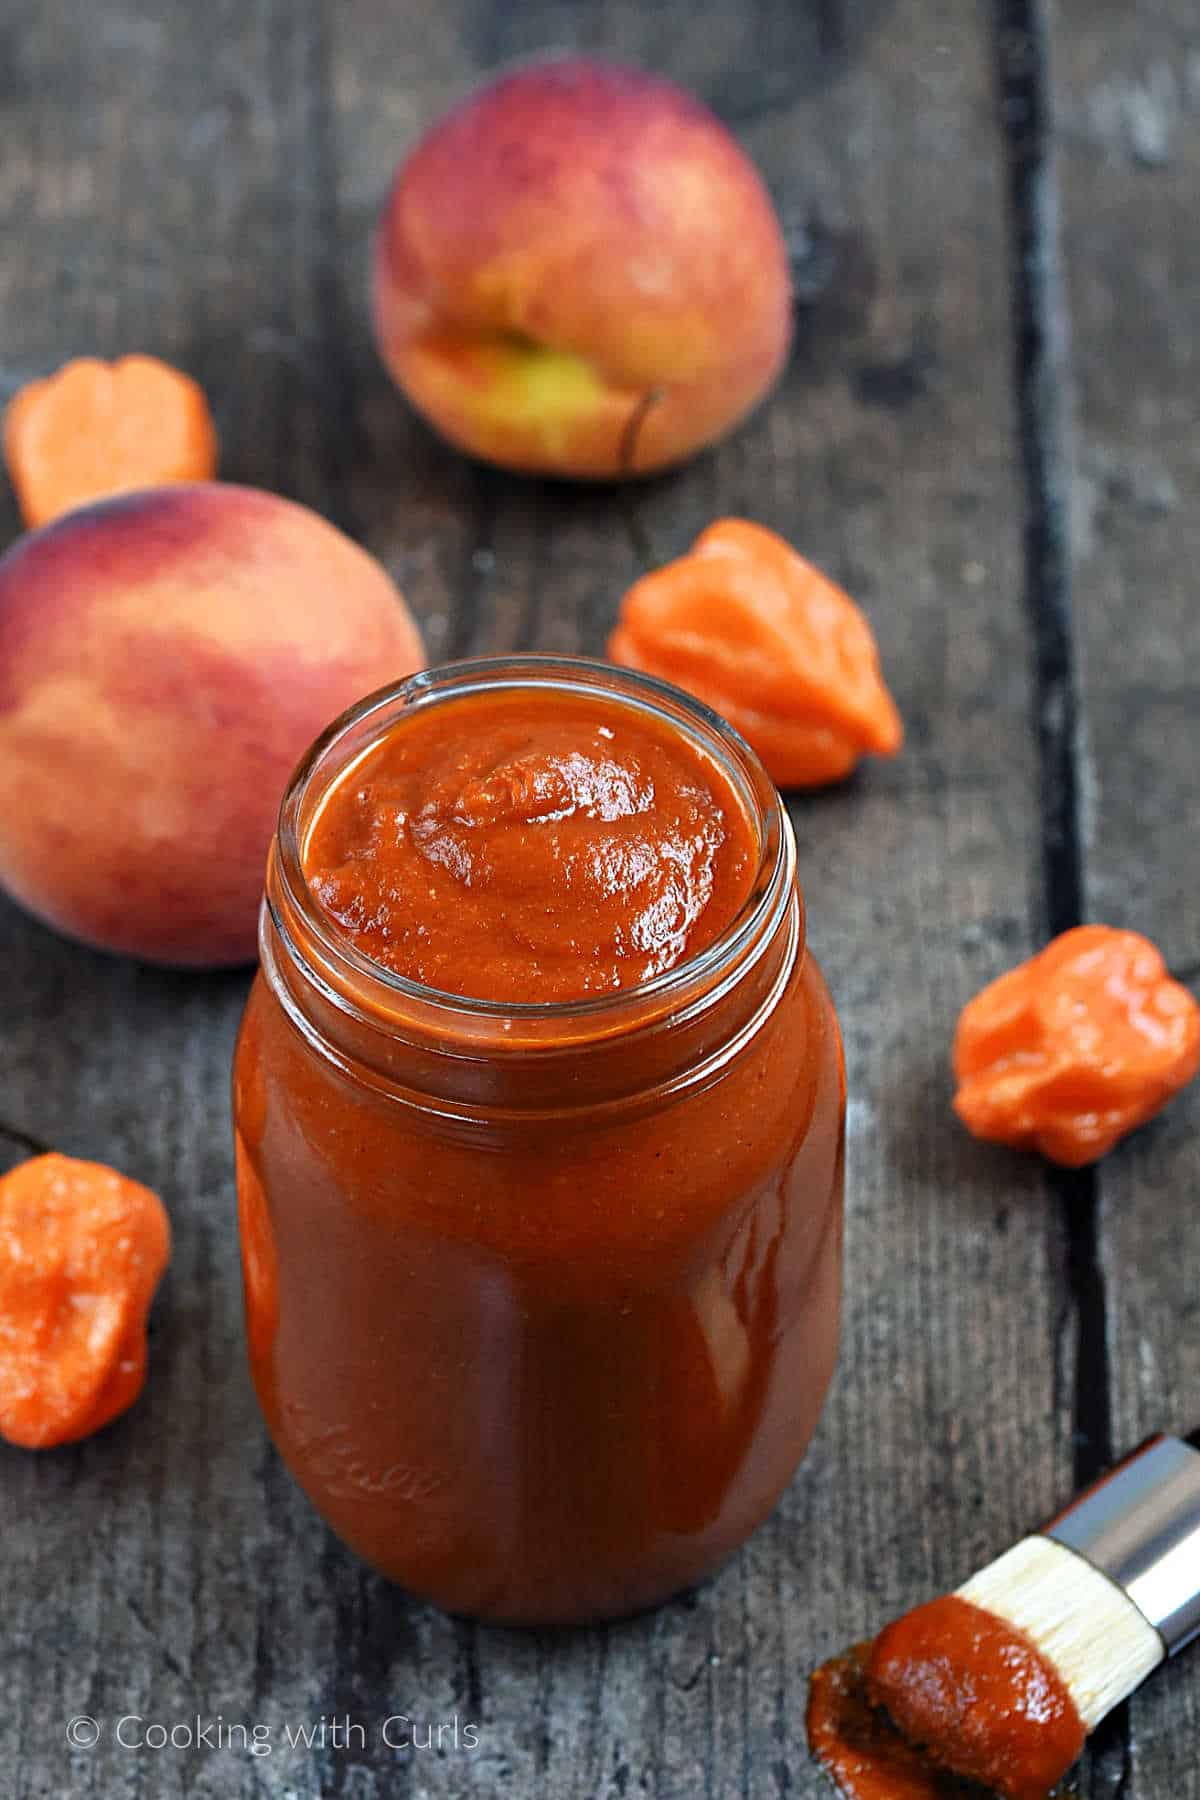 Mason jar filled with peach habanero bbq sauce surrounded by fresh peaches and peppers.